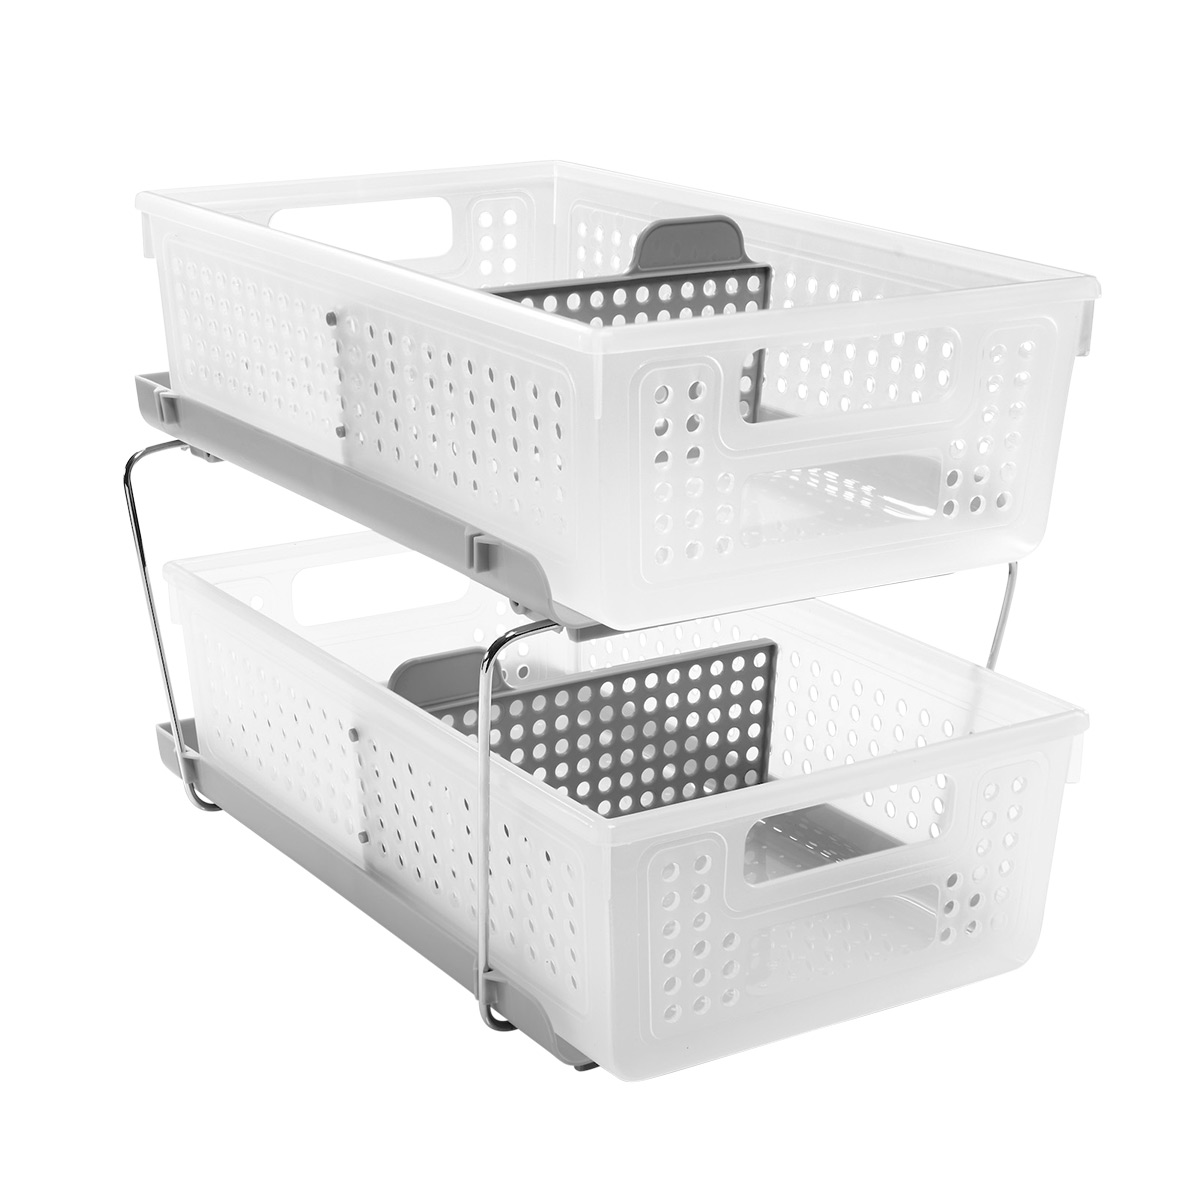 https://www.containerstore.com/catalogimages/444447/10085415-Madesmart-VEN1.jpg